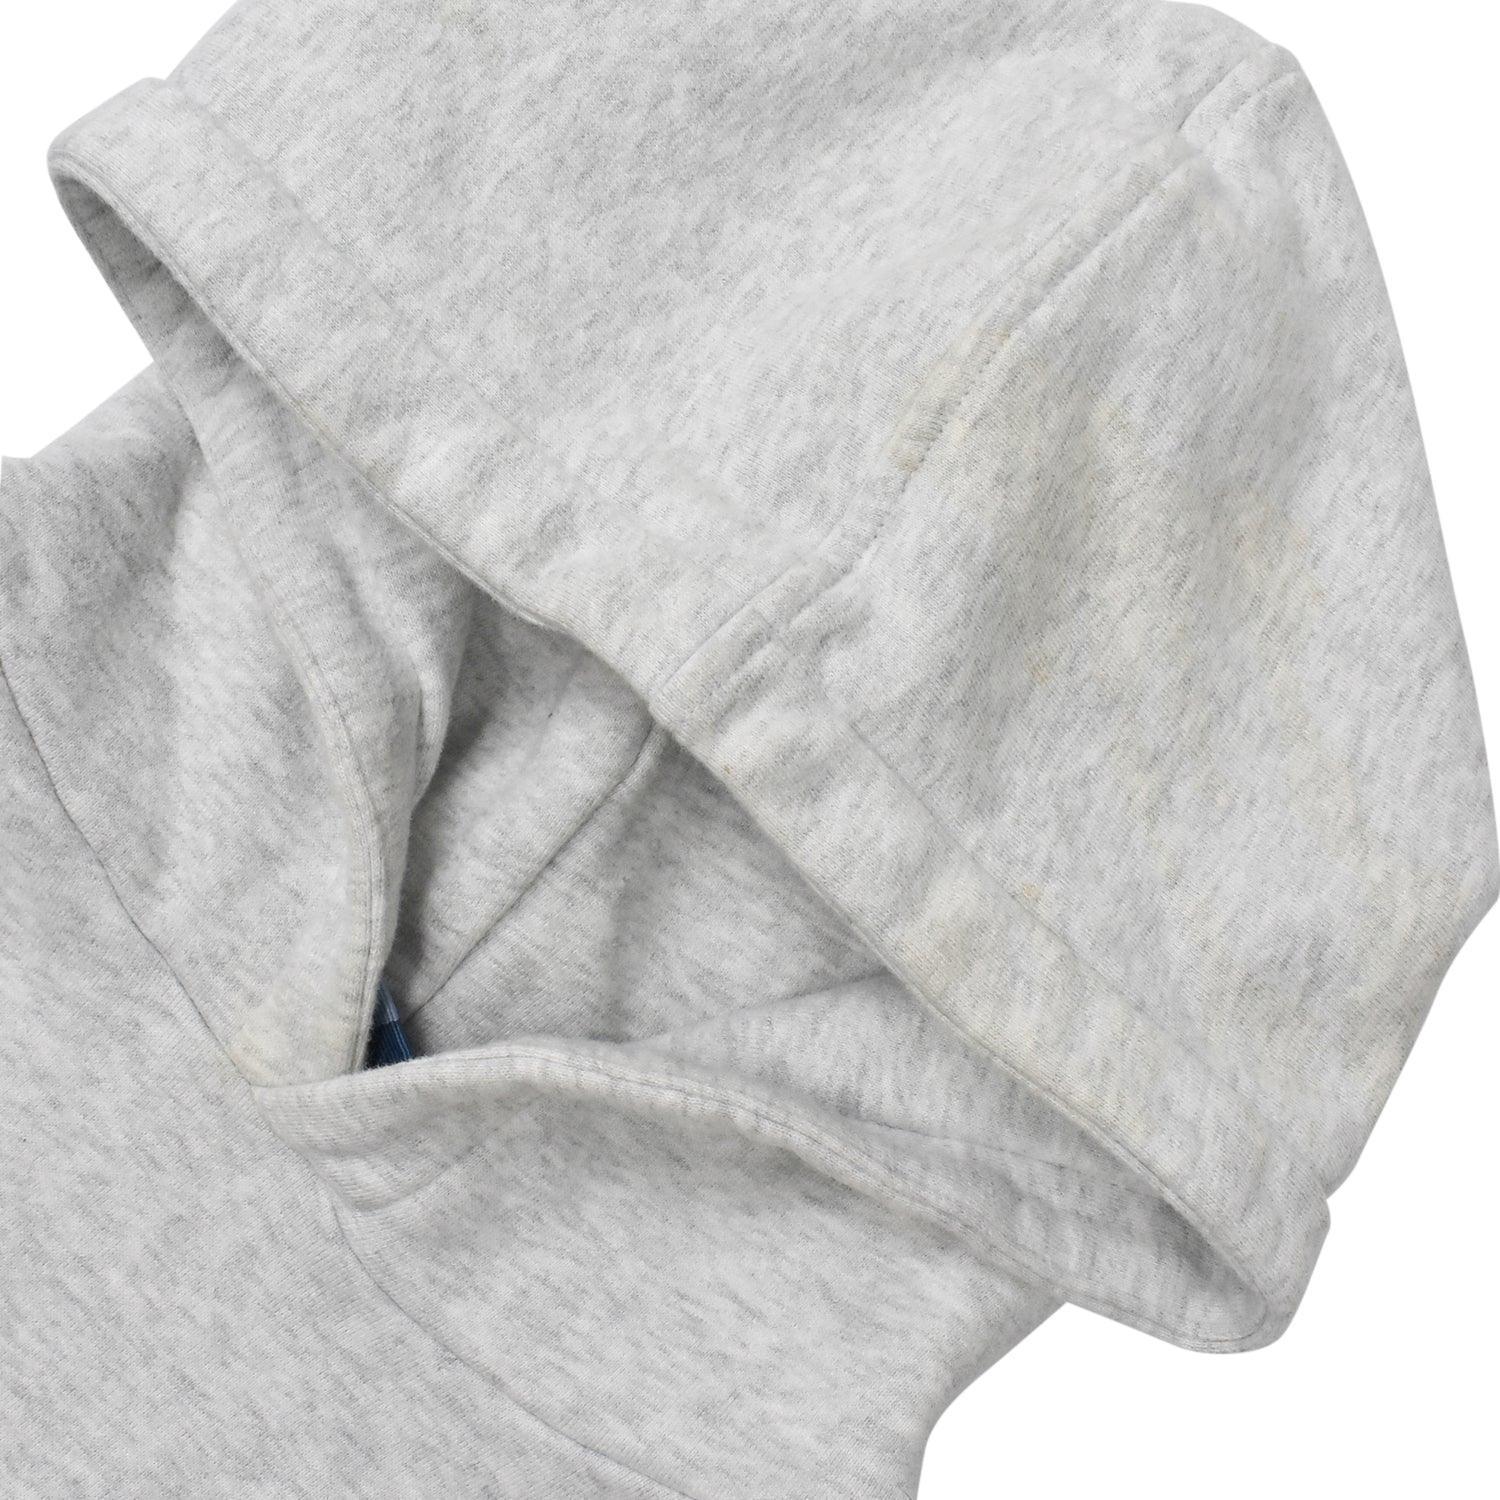 KITH Hoodie - Youth's 12 - Fashionably Yours